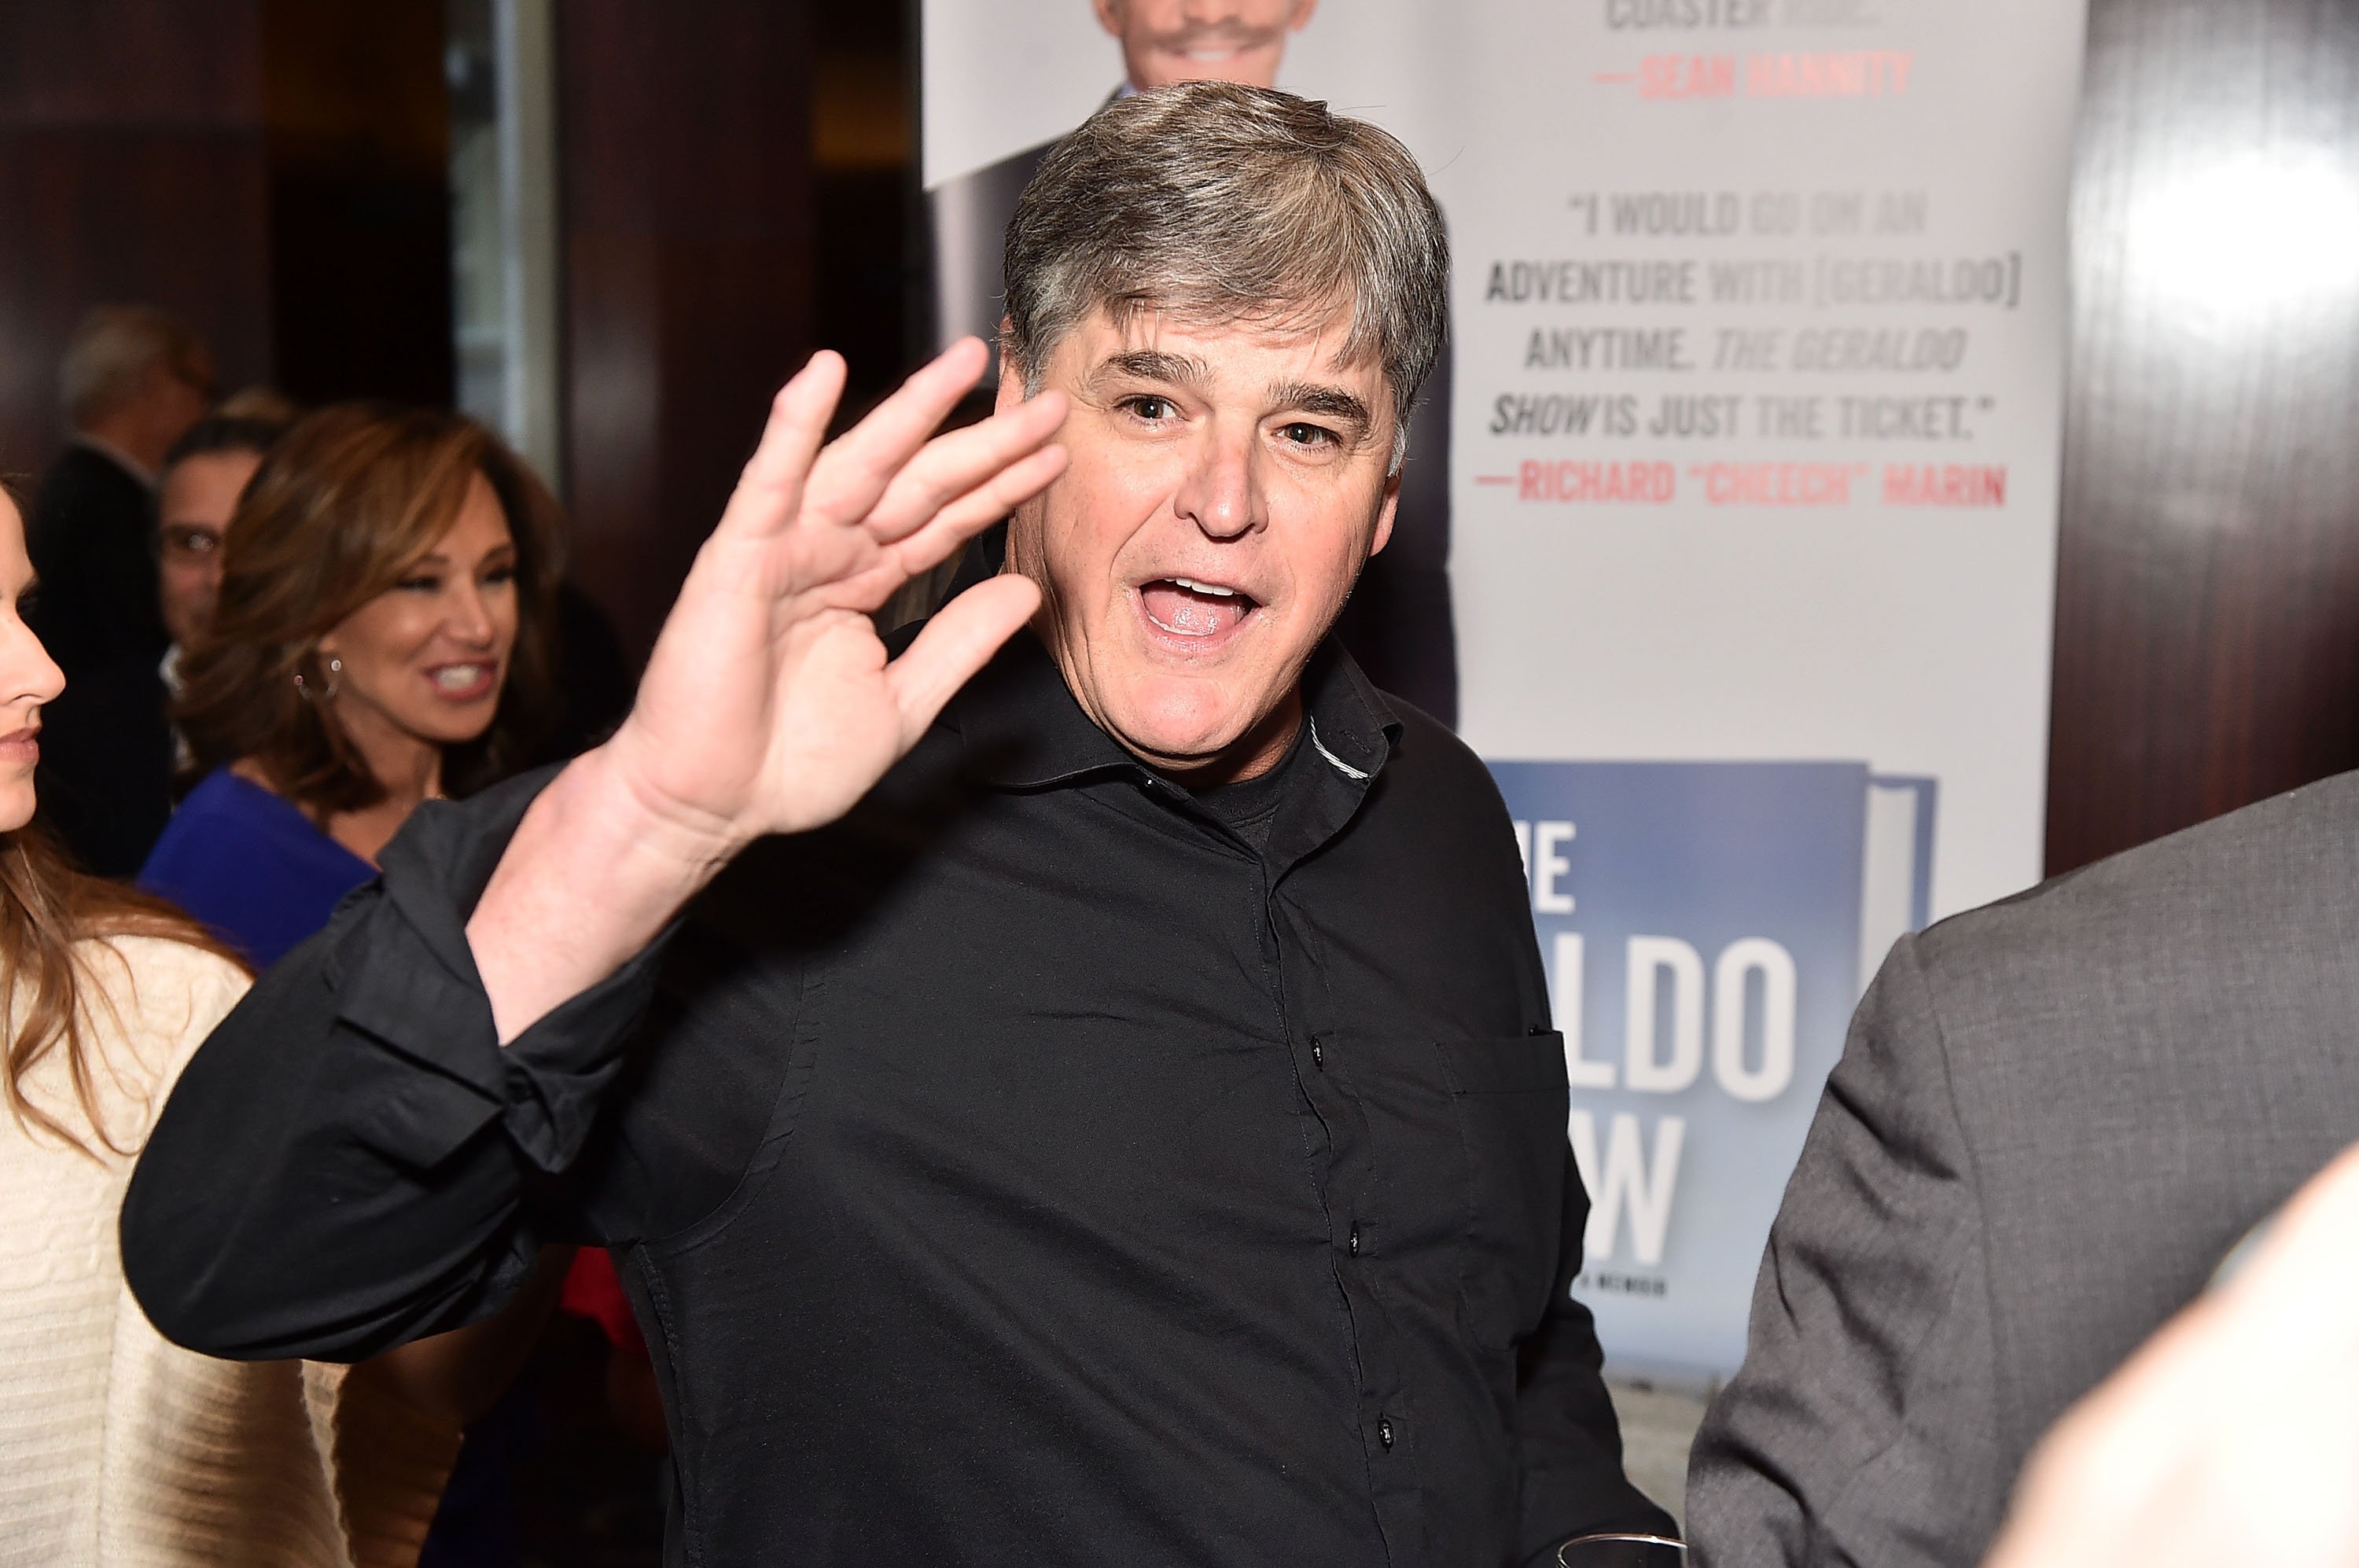 Sean Hannity attends Geraldo Rivera Launches His New Book "The Geraldo Show: A Memoir" at Del Frisco's Grille on April 2, 2018 in New York City. | Photo: GettyImages